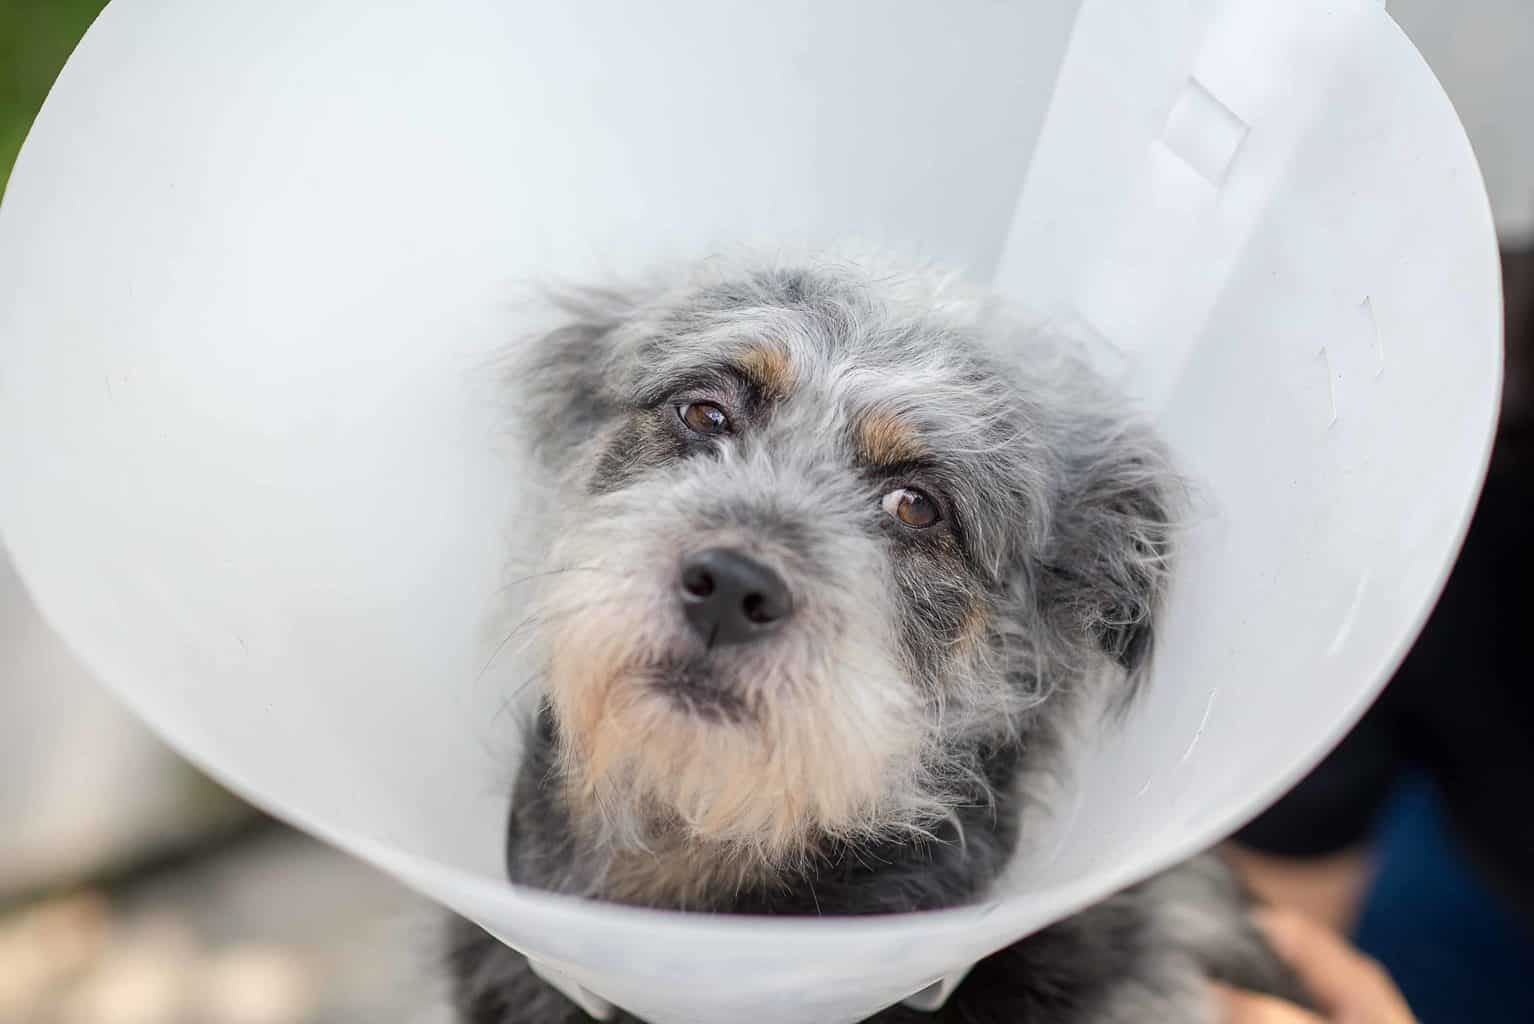 Sick dog wears an elizabethan collar or e-collar after vet visit. Before buying pet health insurance, consider your dog's age, breed, and overall health. Understand how your policy works and what it covers.